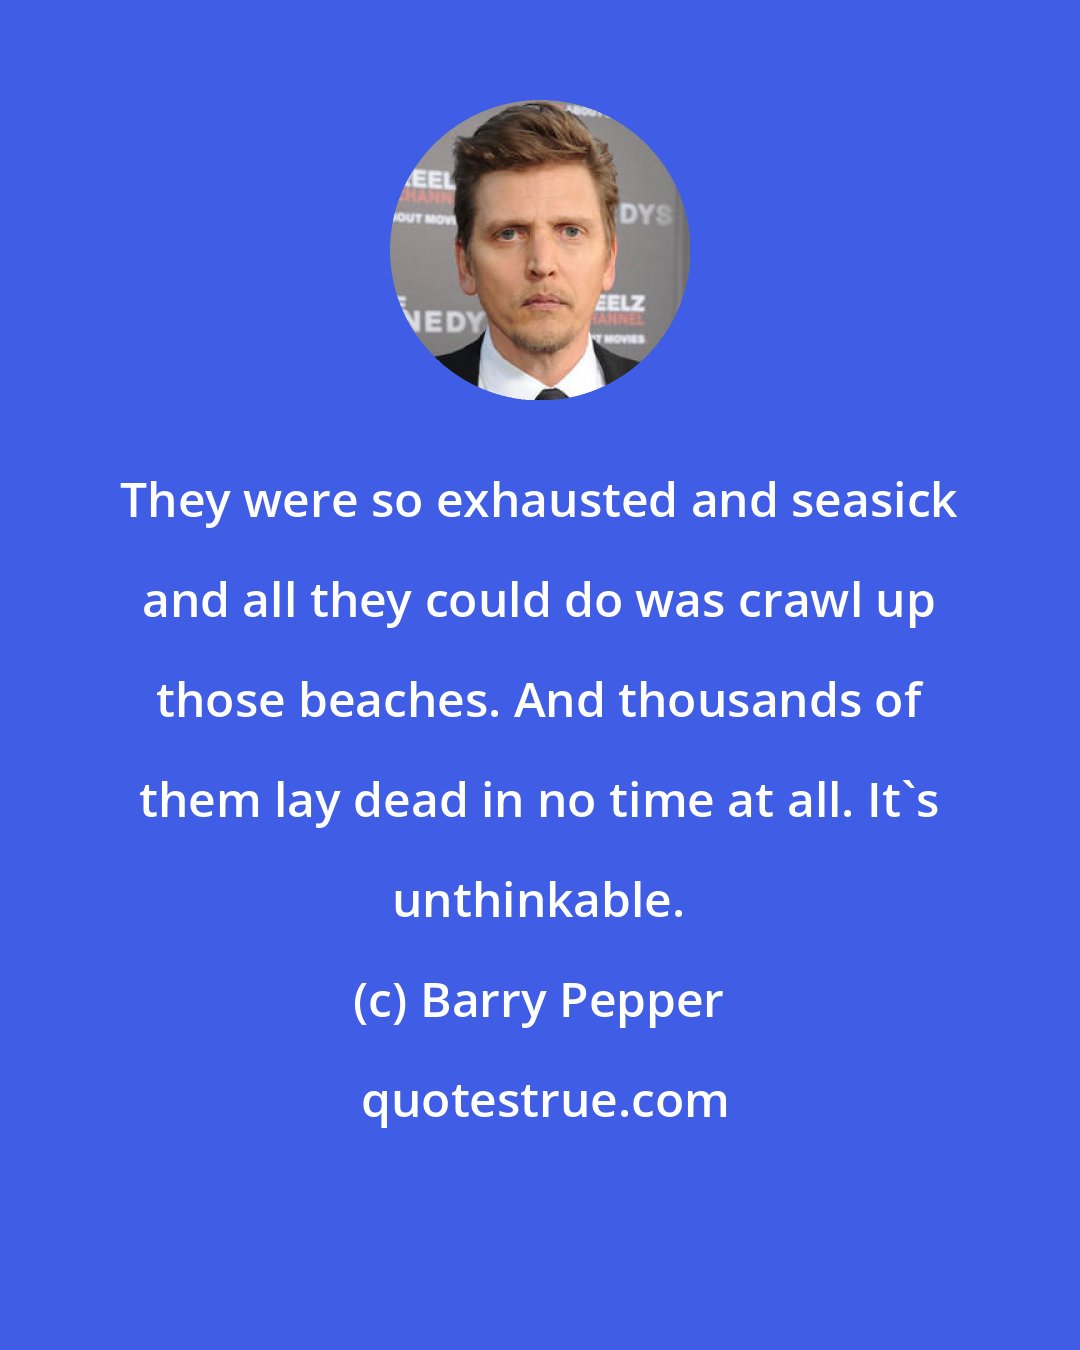 Barry Pepper: They were so exhausted and seasick and all they could do was crawl up those beaches. And thousands of them lay dead in no time at all. It's unthinkable.